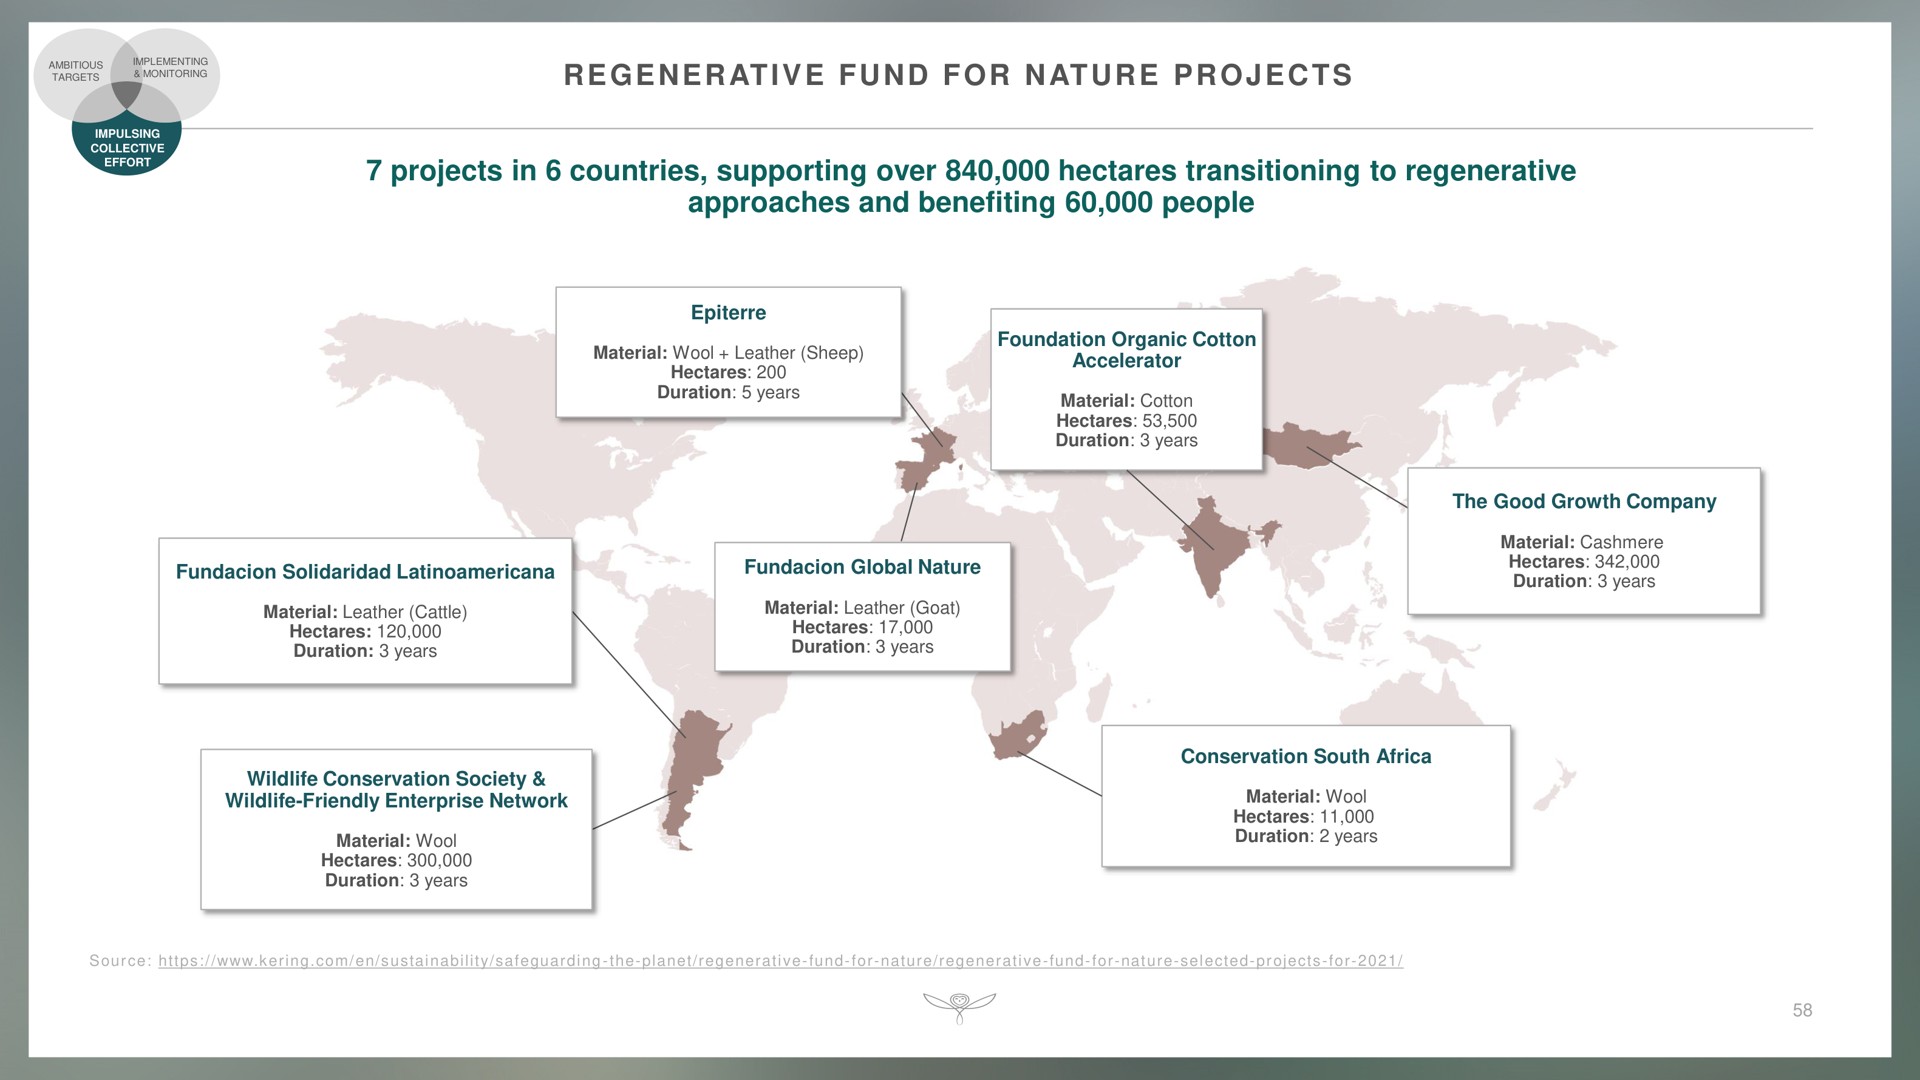 at i at projects in countries supporting over hectares transitioning to regenerative approaches and benefiting people targets a fund for nature | Kering